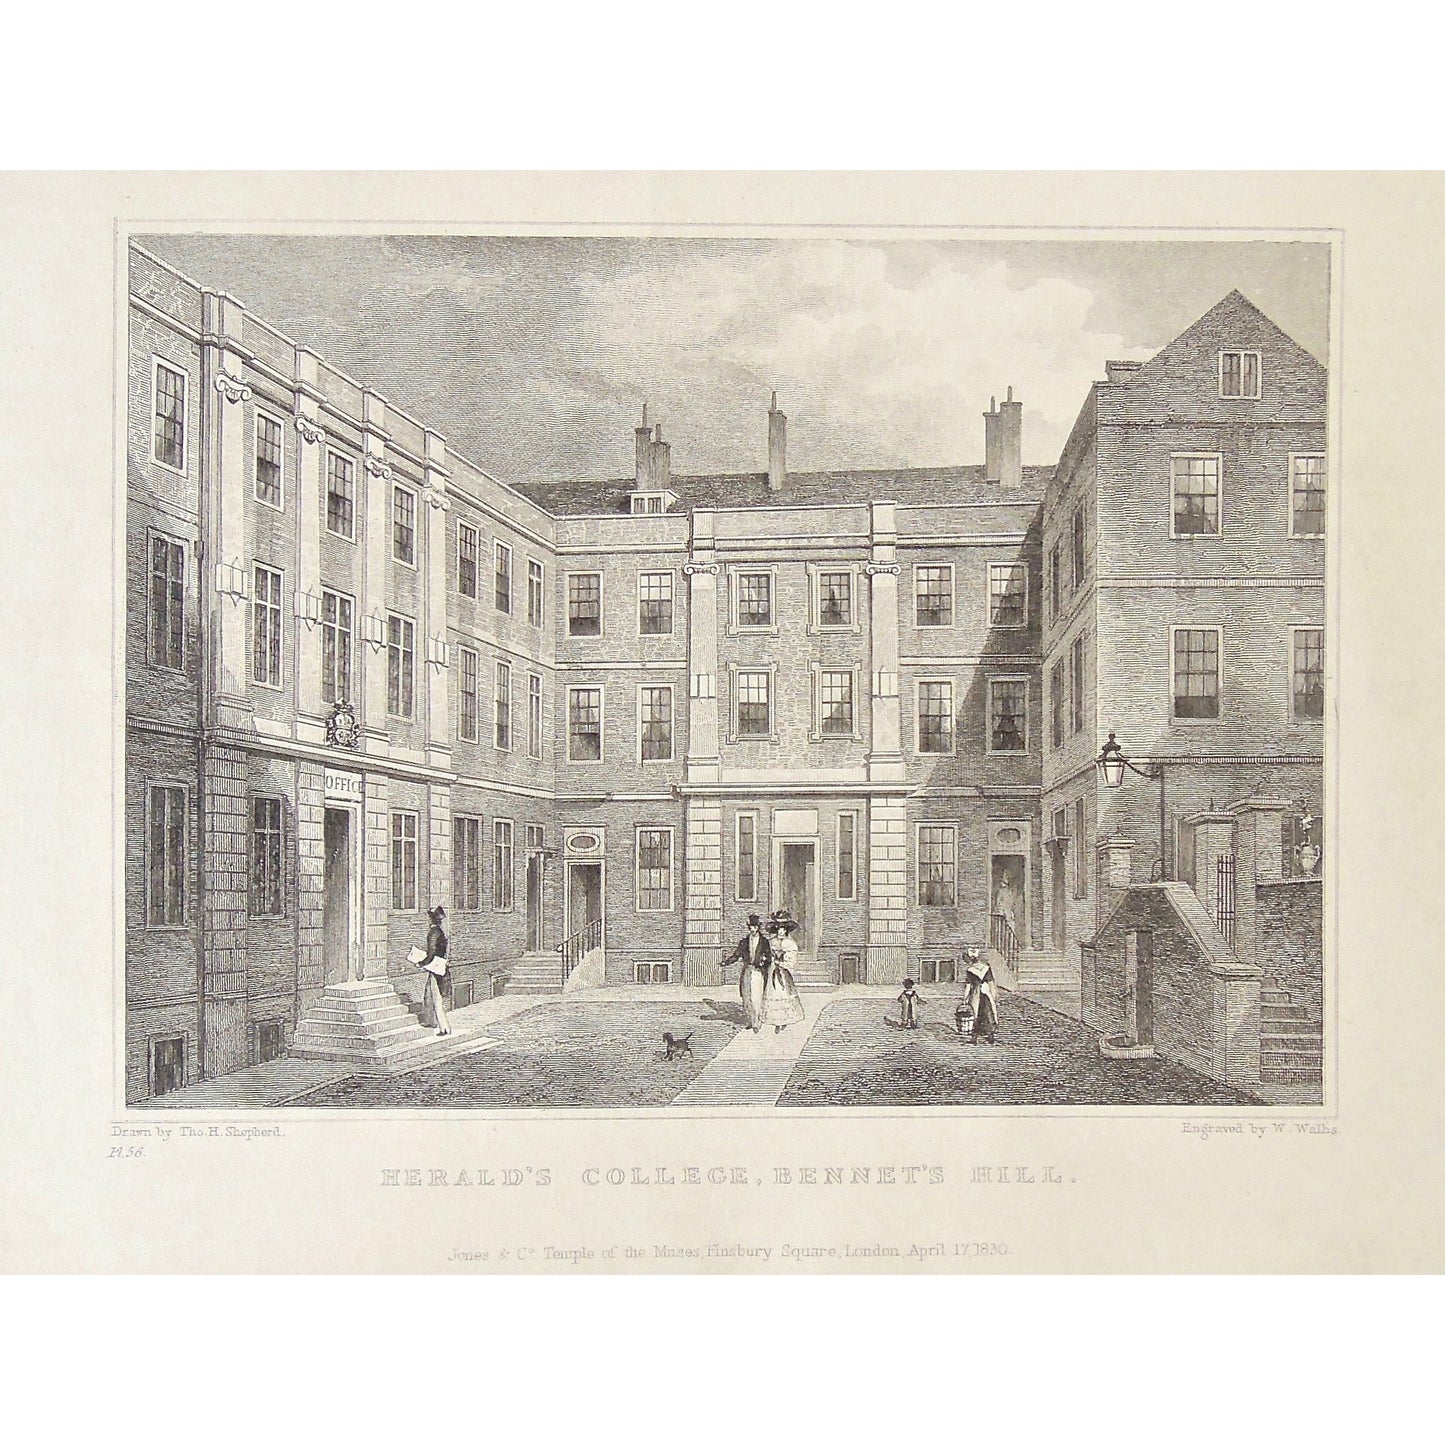 Physician's College, Warwick Lane.  (S2-42a)